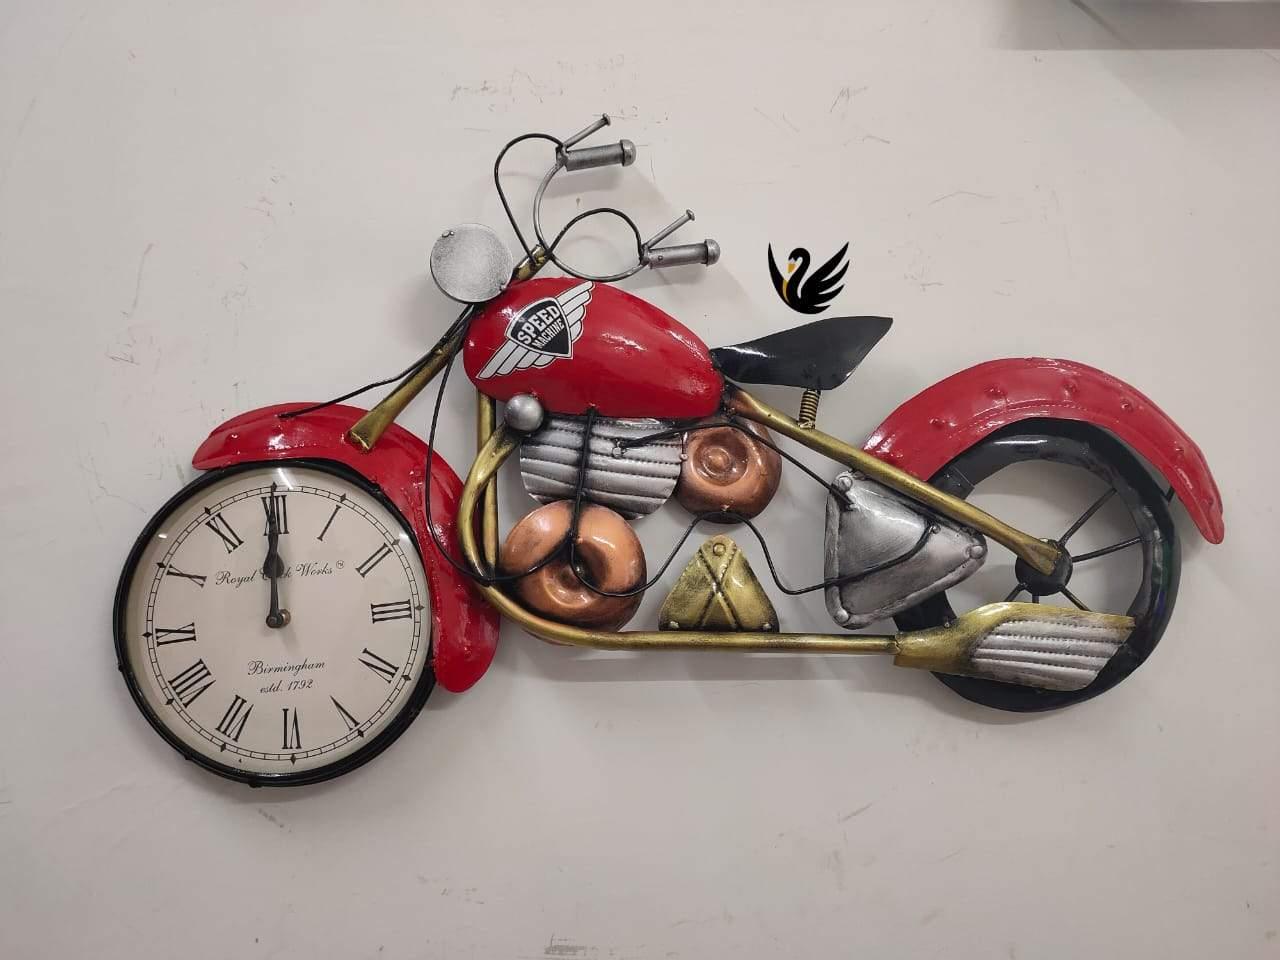 BIG SIZE Metal byke with clock for wall decor ( size 3 x 1.5 feet ) - GreentouchCrafts